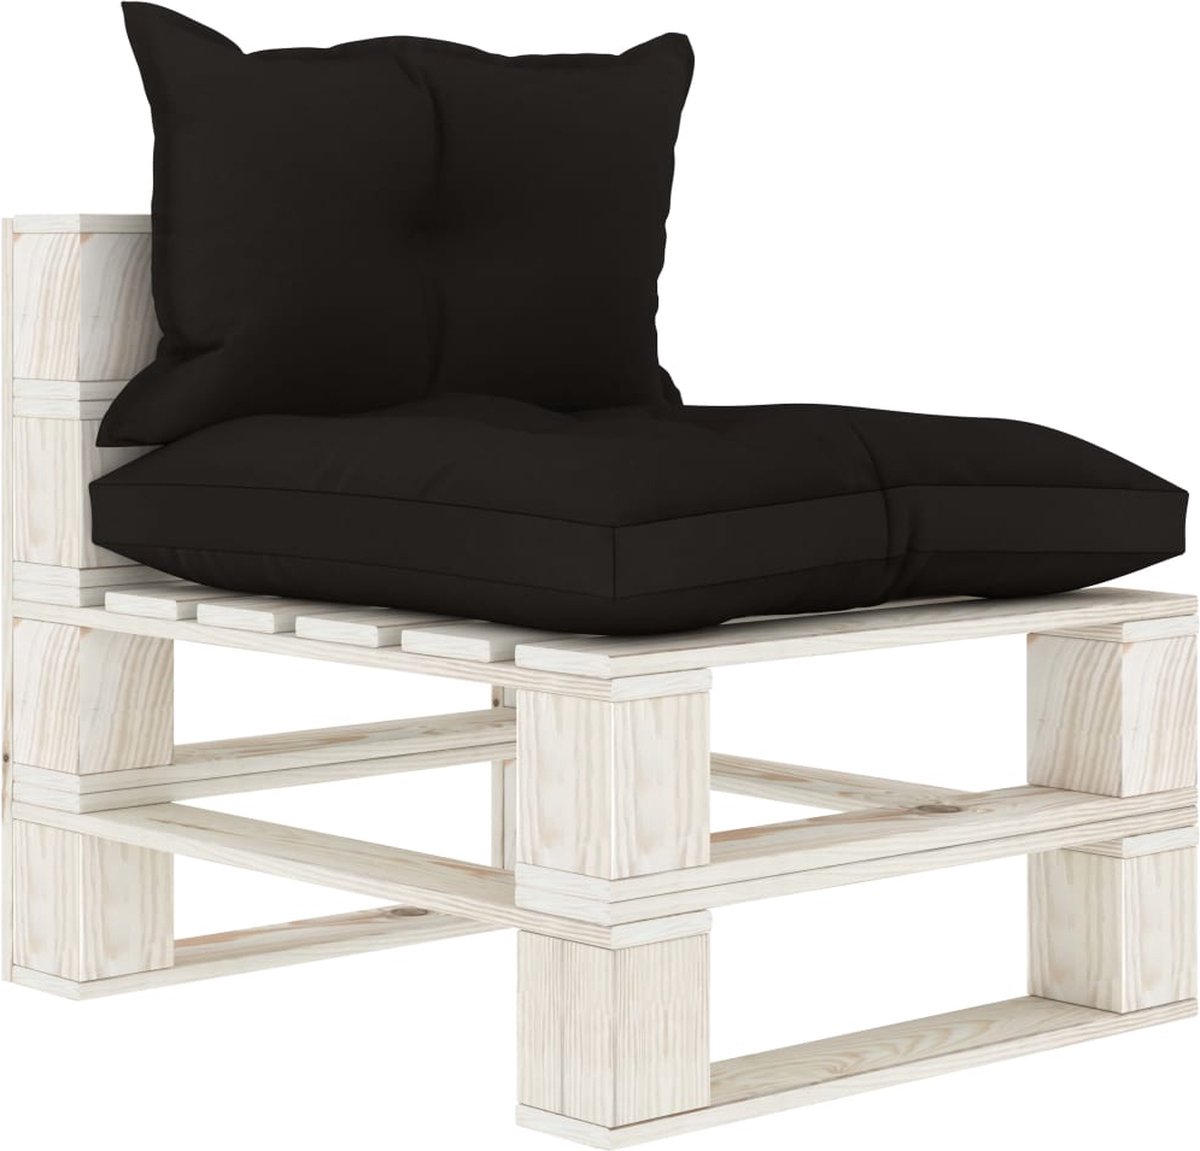 The Living Store Pallet Bank - Tuinmeubel - 60 x 67.5 x 60.8 cm - Grenenhout